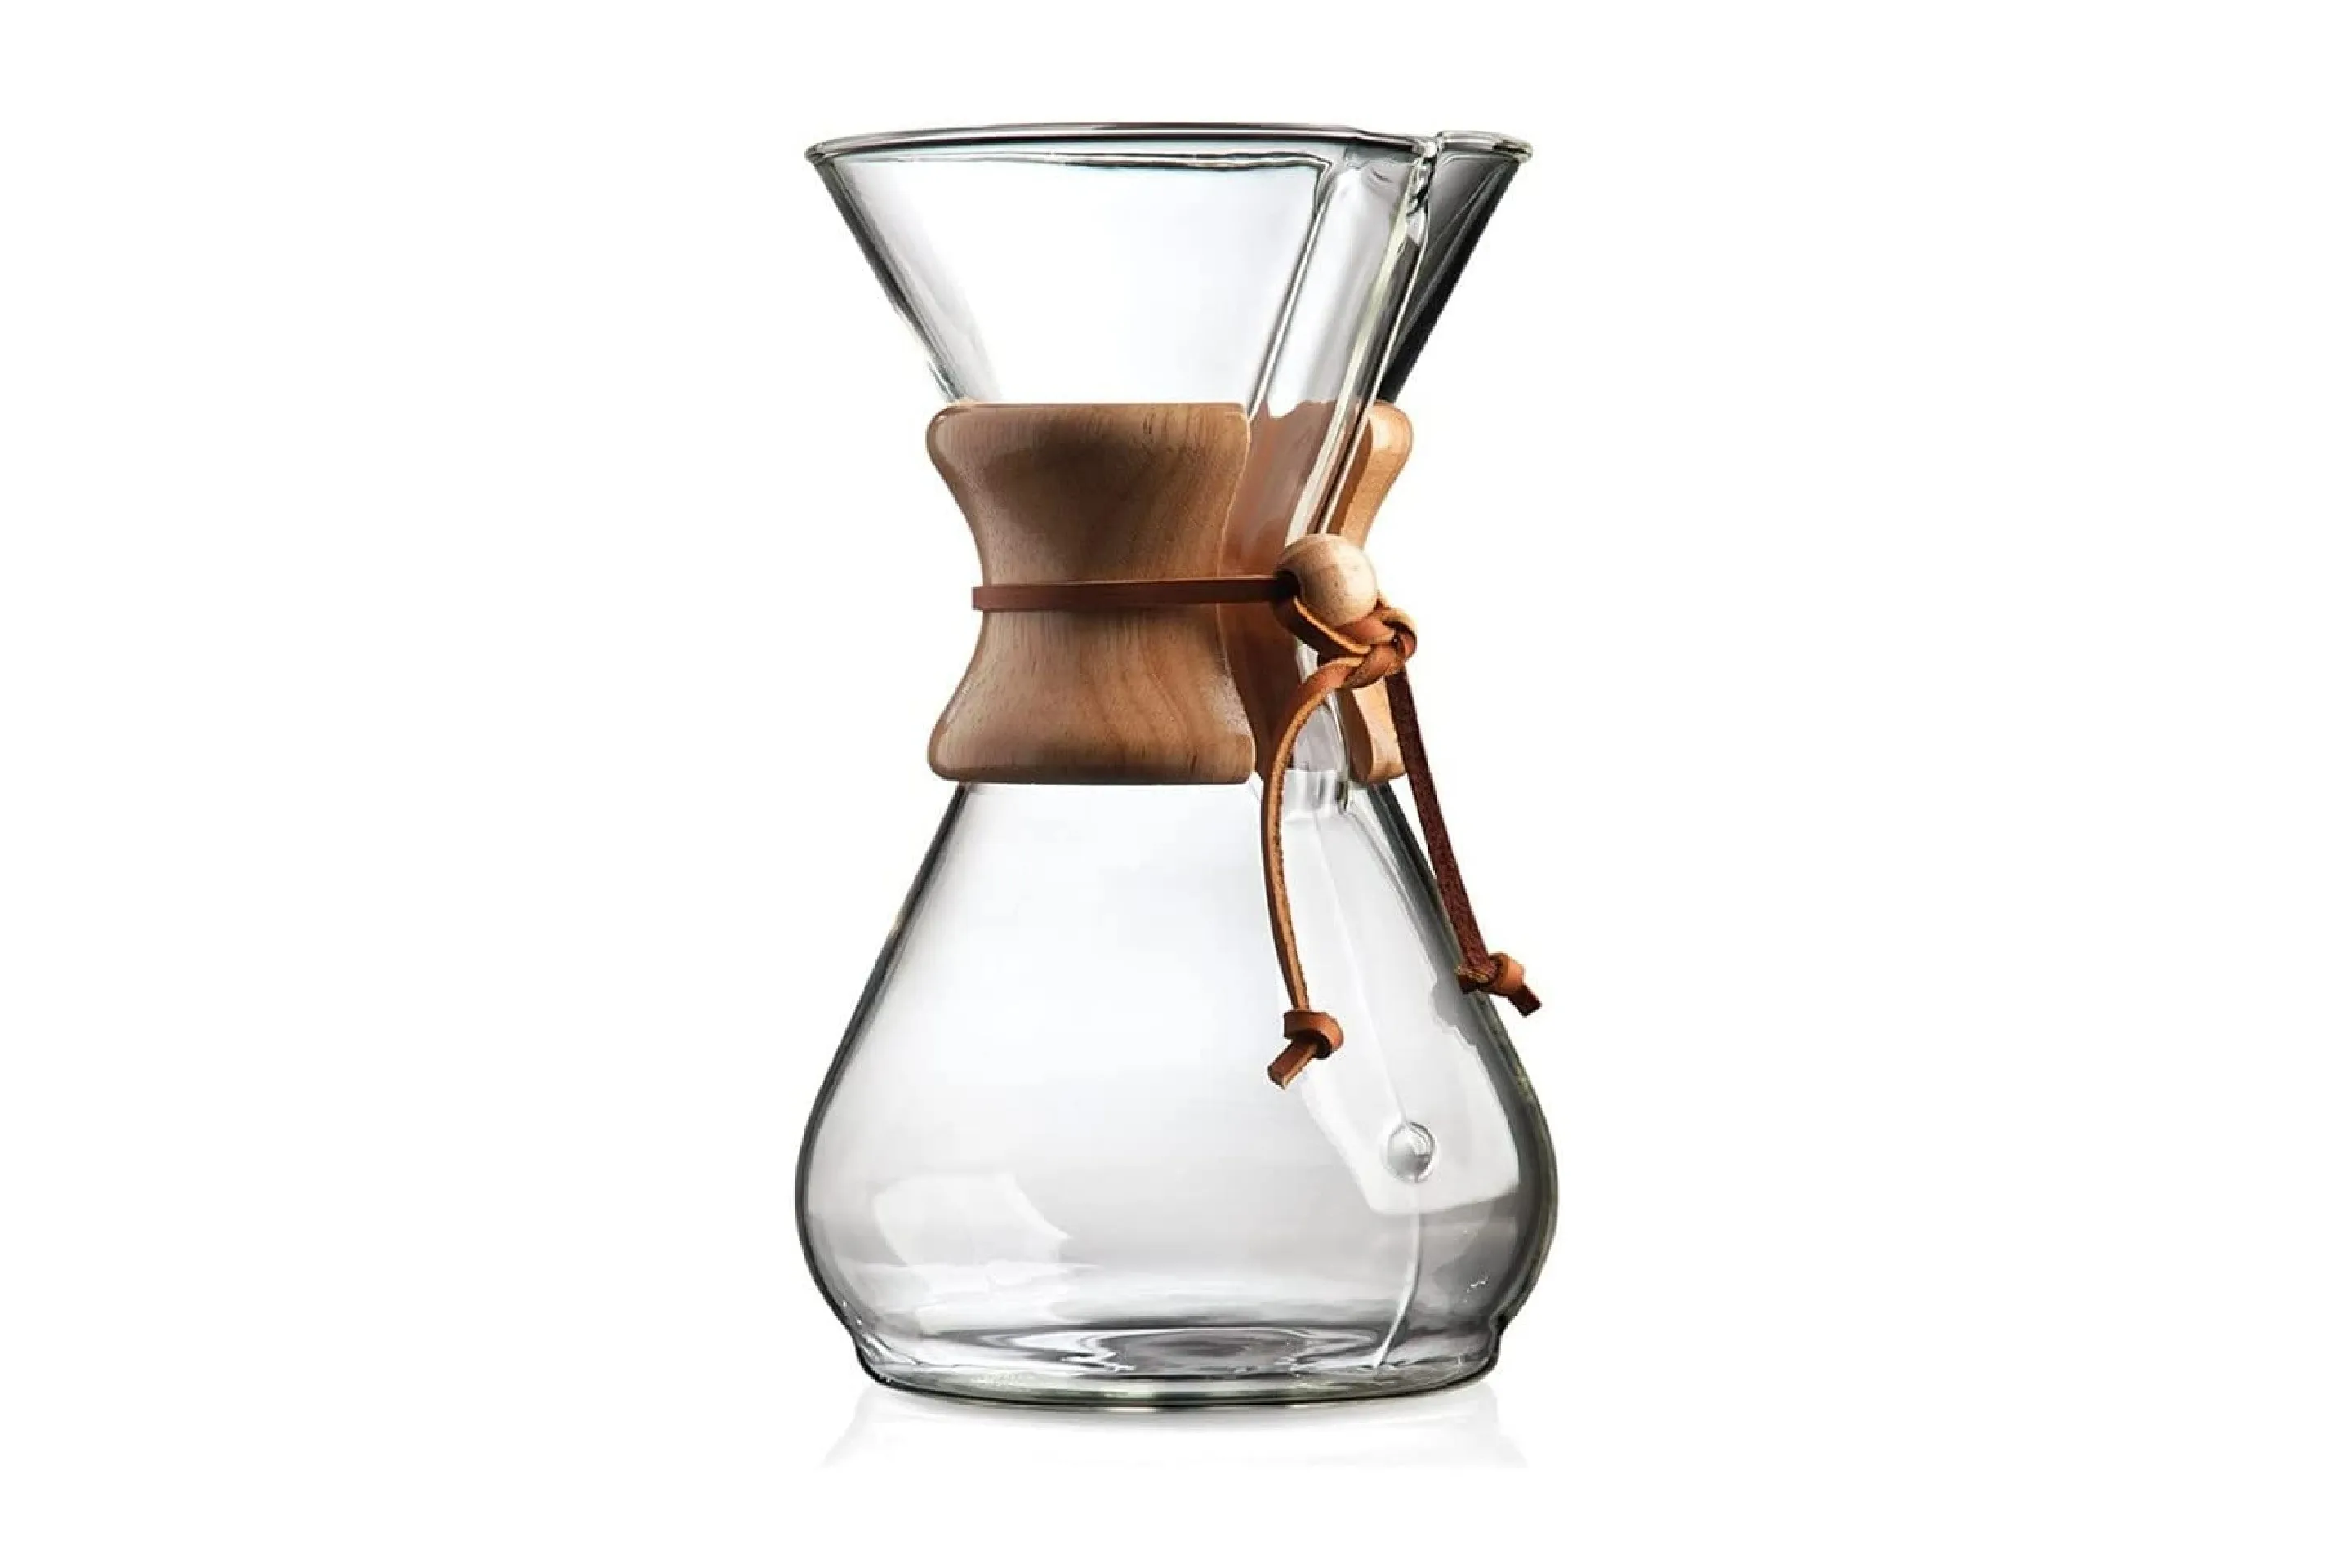 COSORI Pour Over Coffee Maker with Double Layer Stainless Steel Filter  Review 